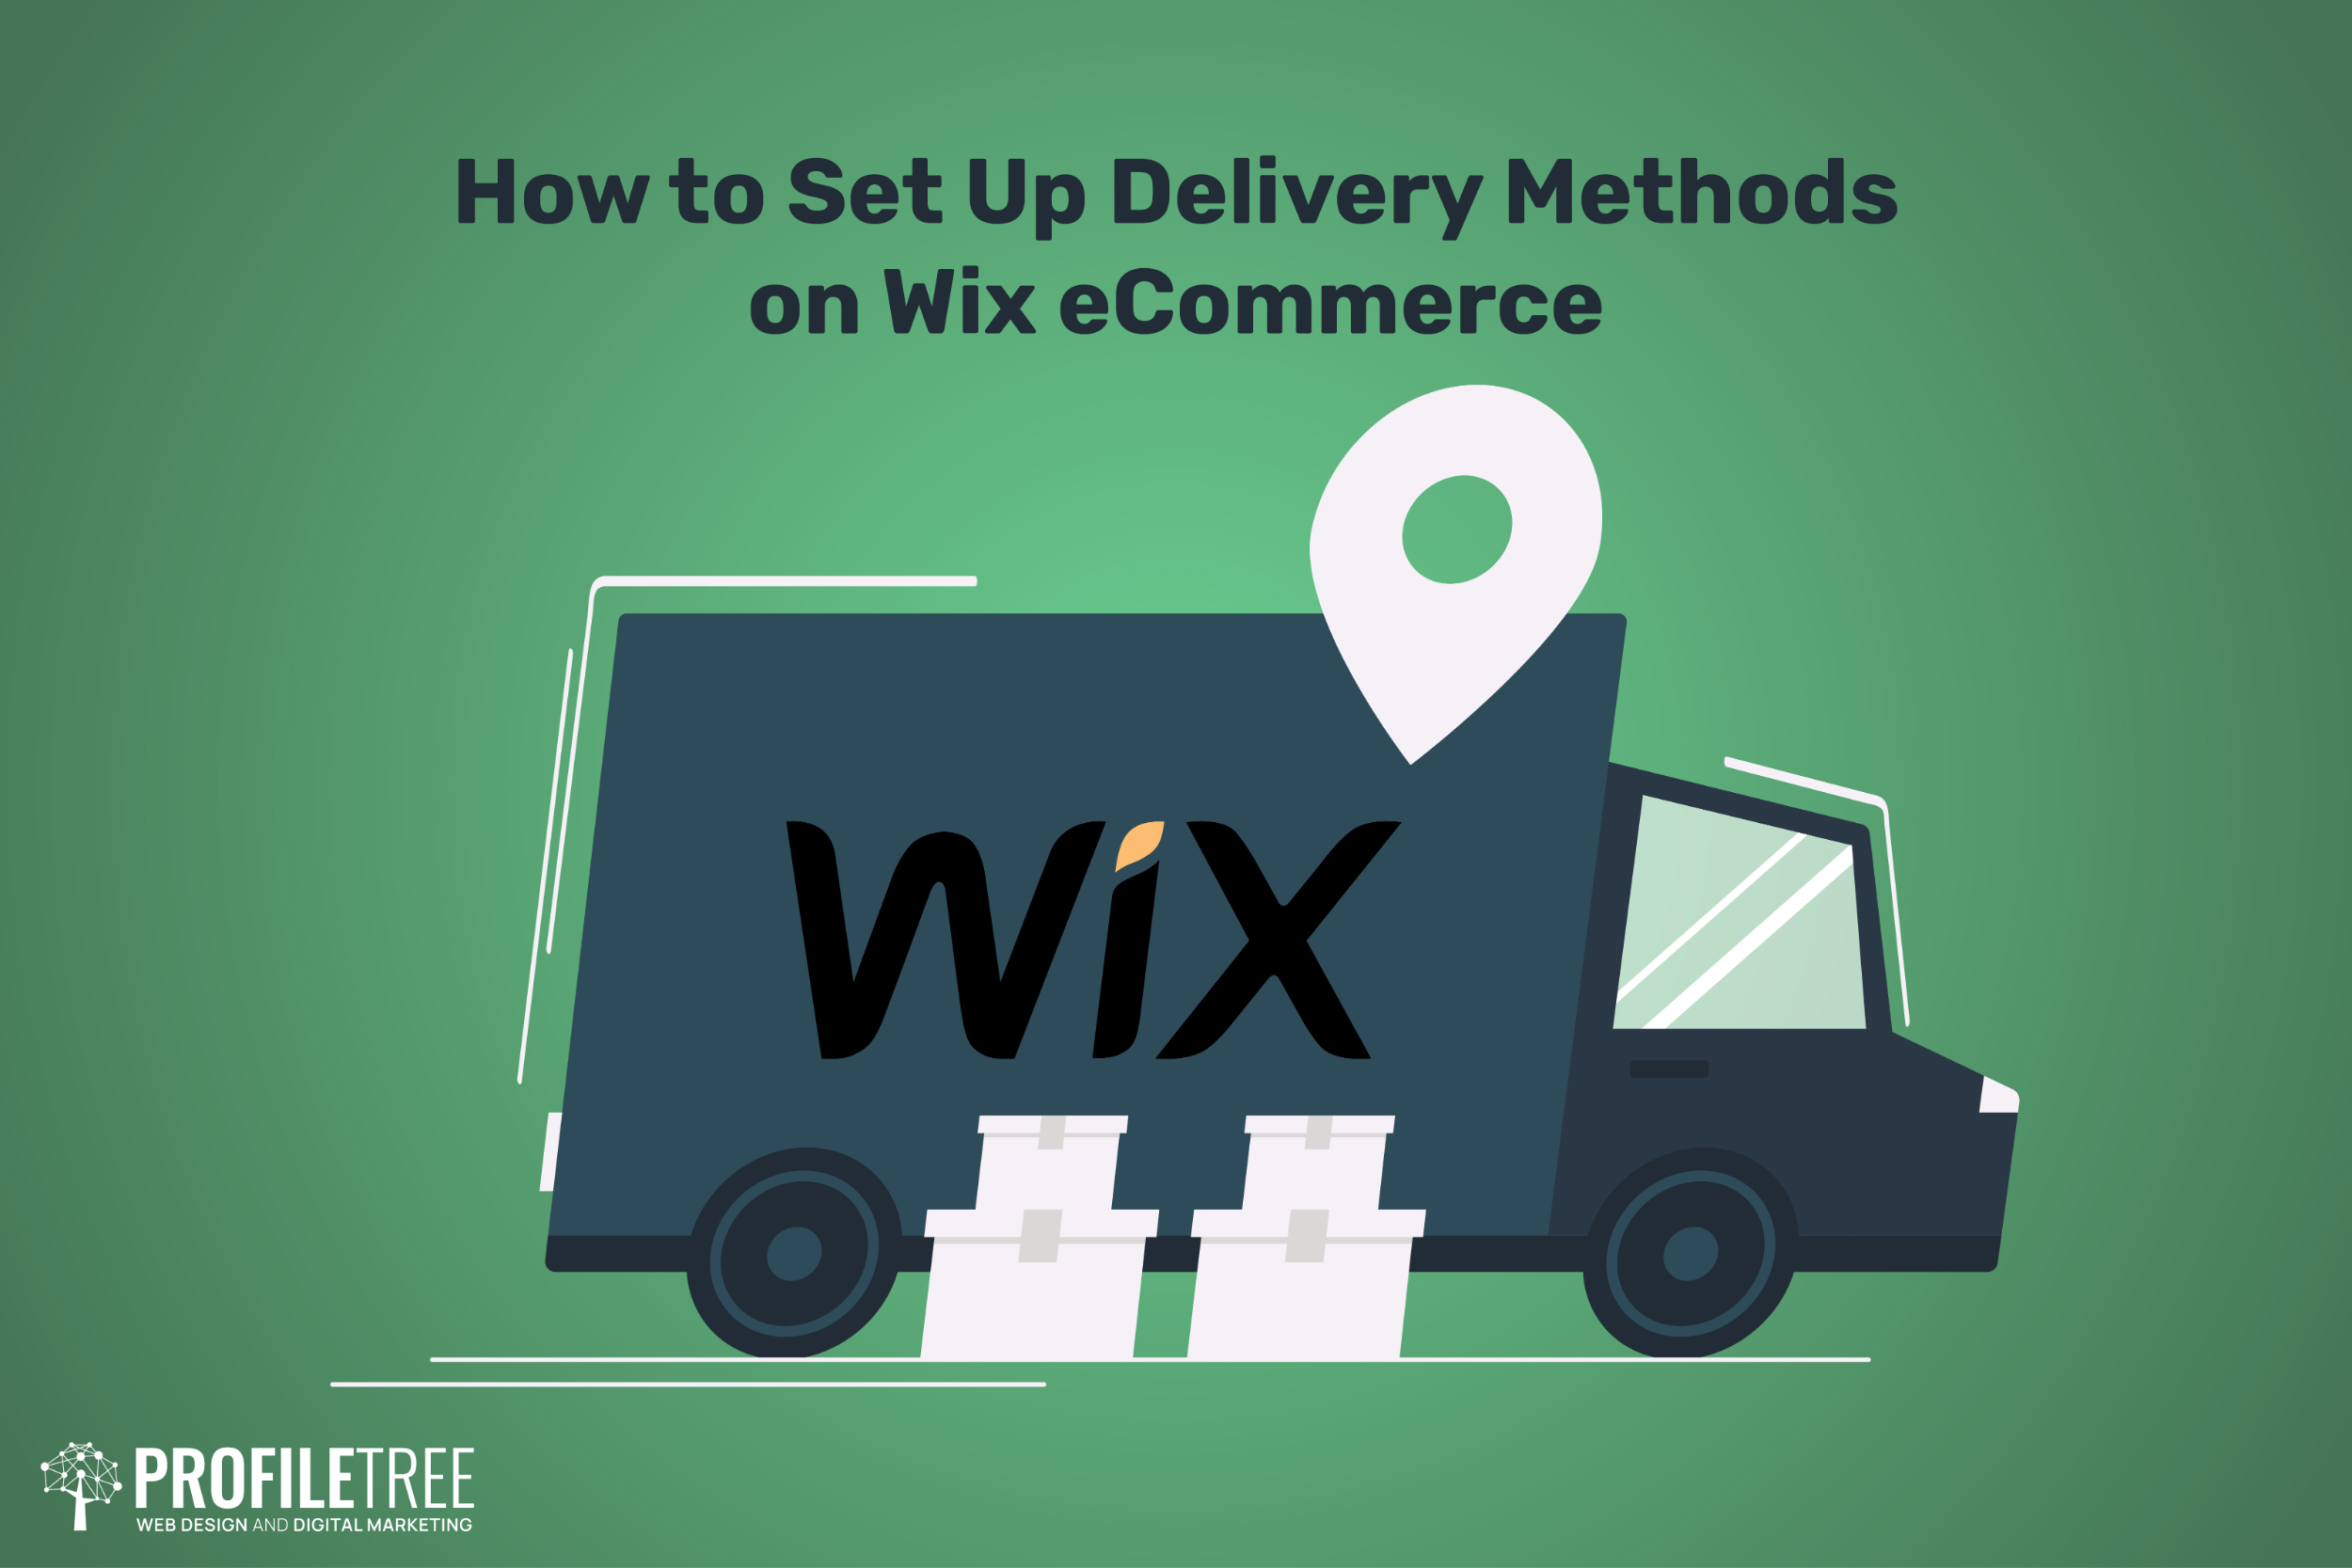 How to set up delivery methods on wix ecommerce